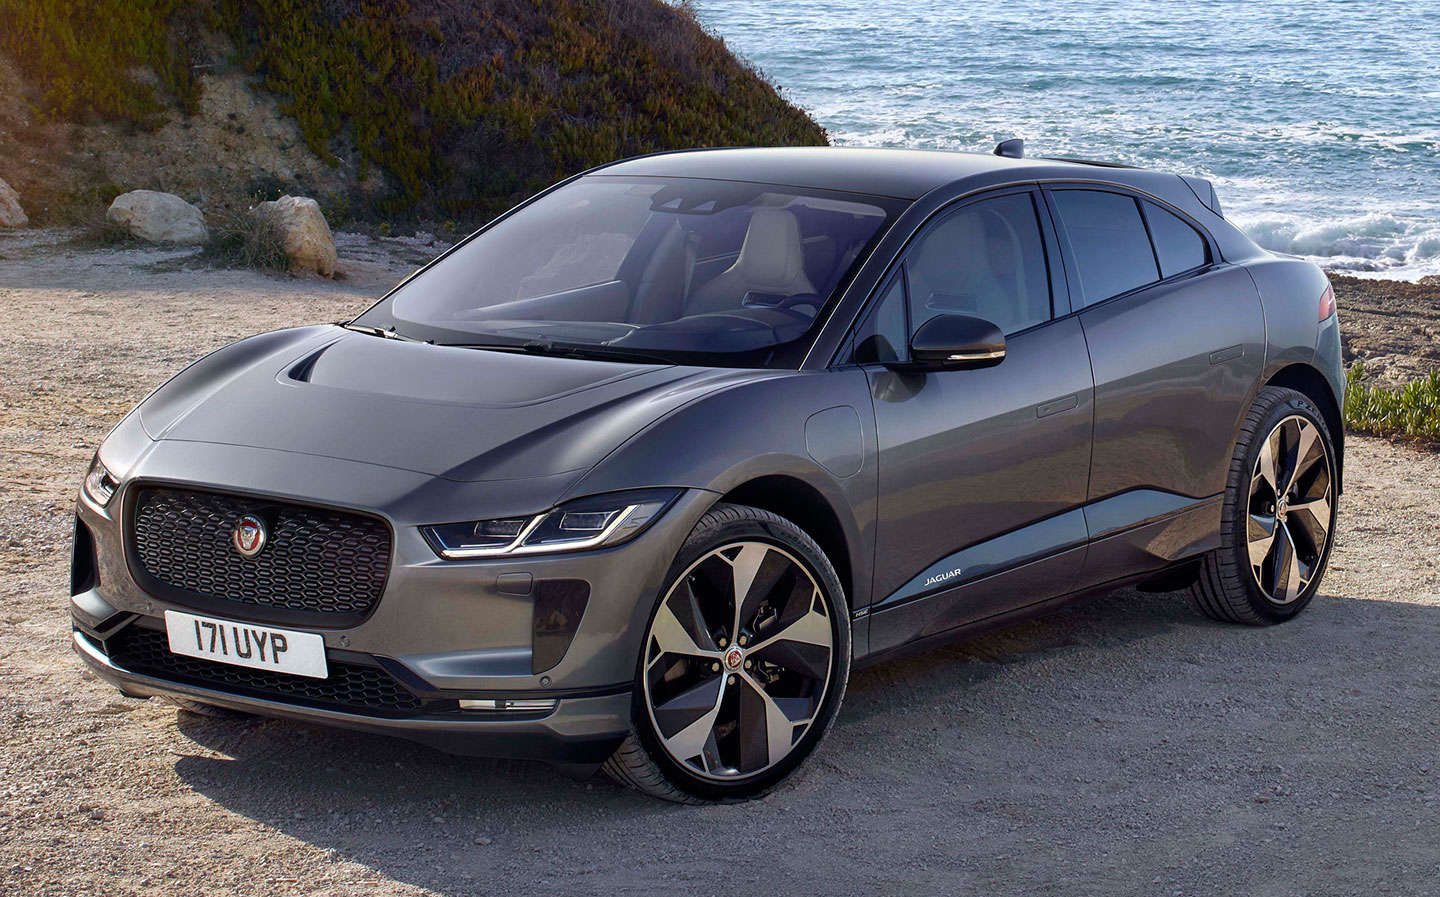 Jaguar confirms it will kill off IPace electric car along with petrol